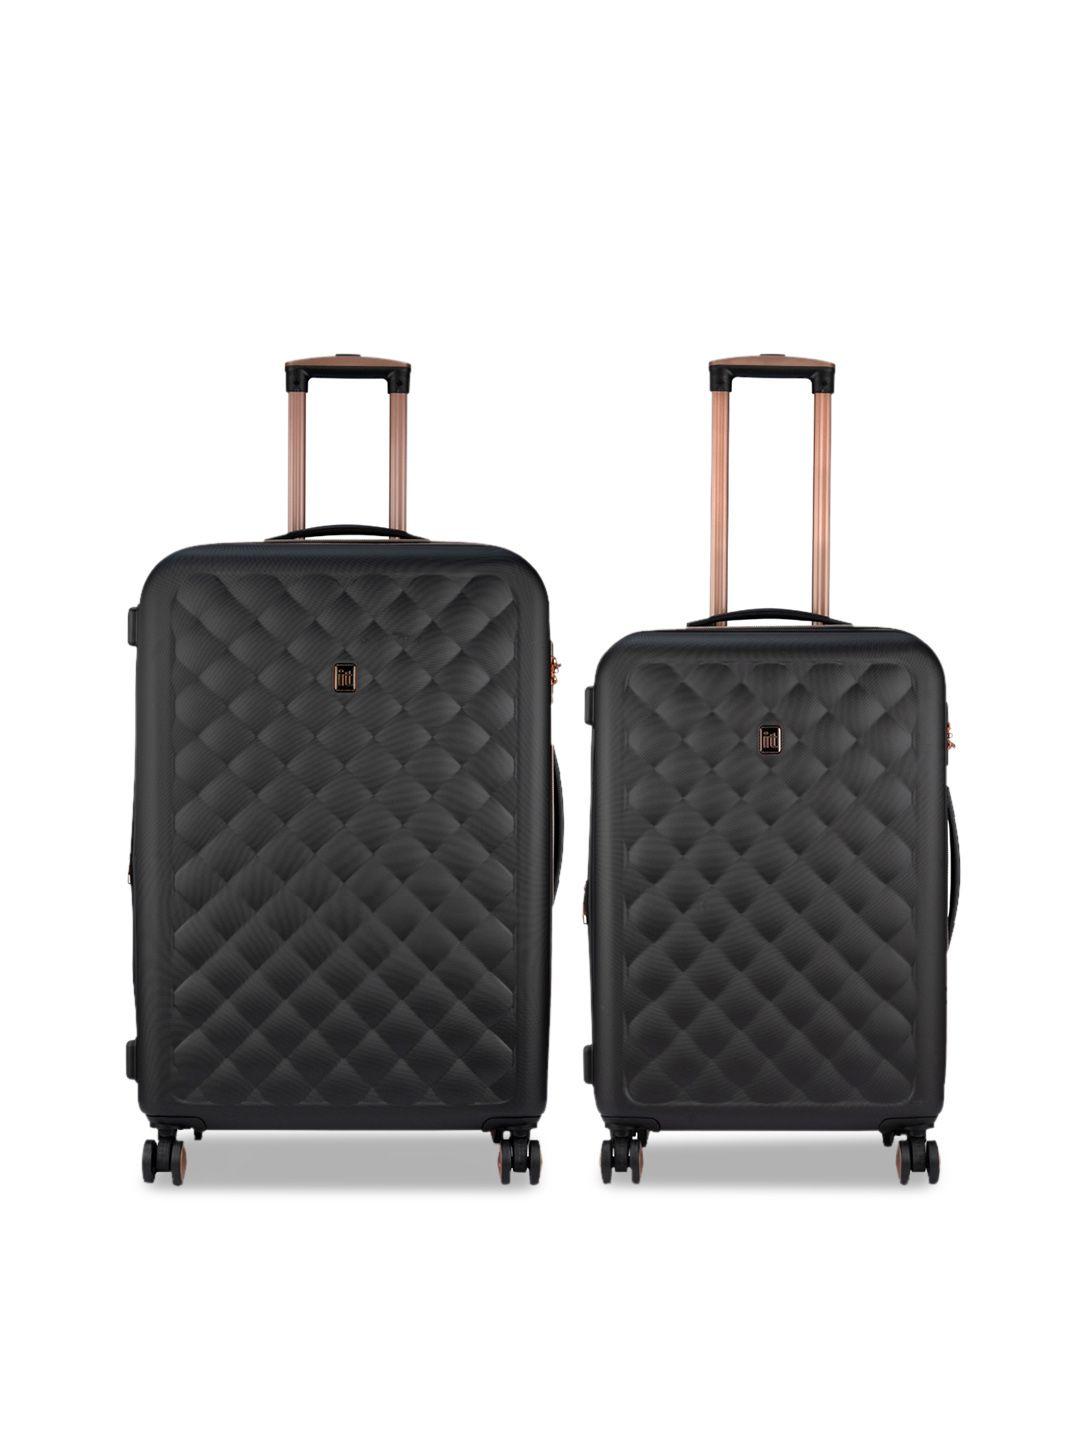 it luggage set of 2 black textured trolley suitcase